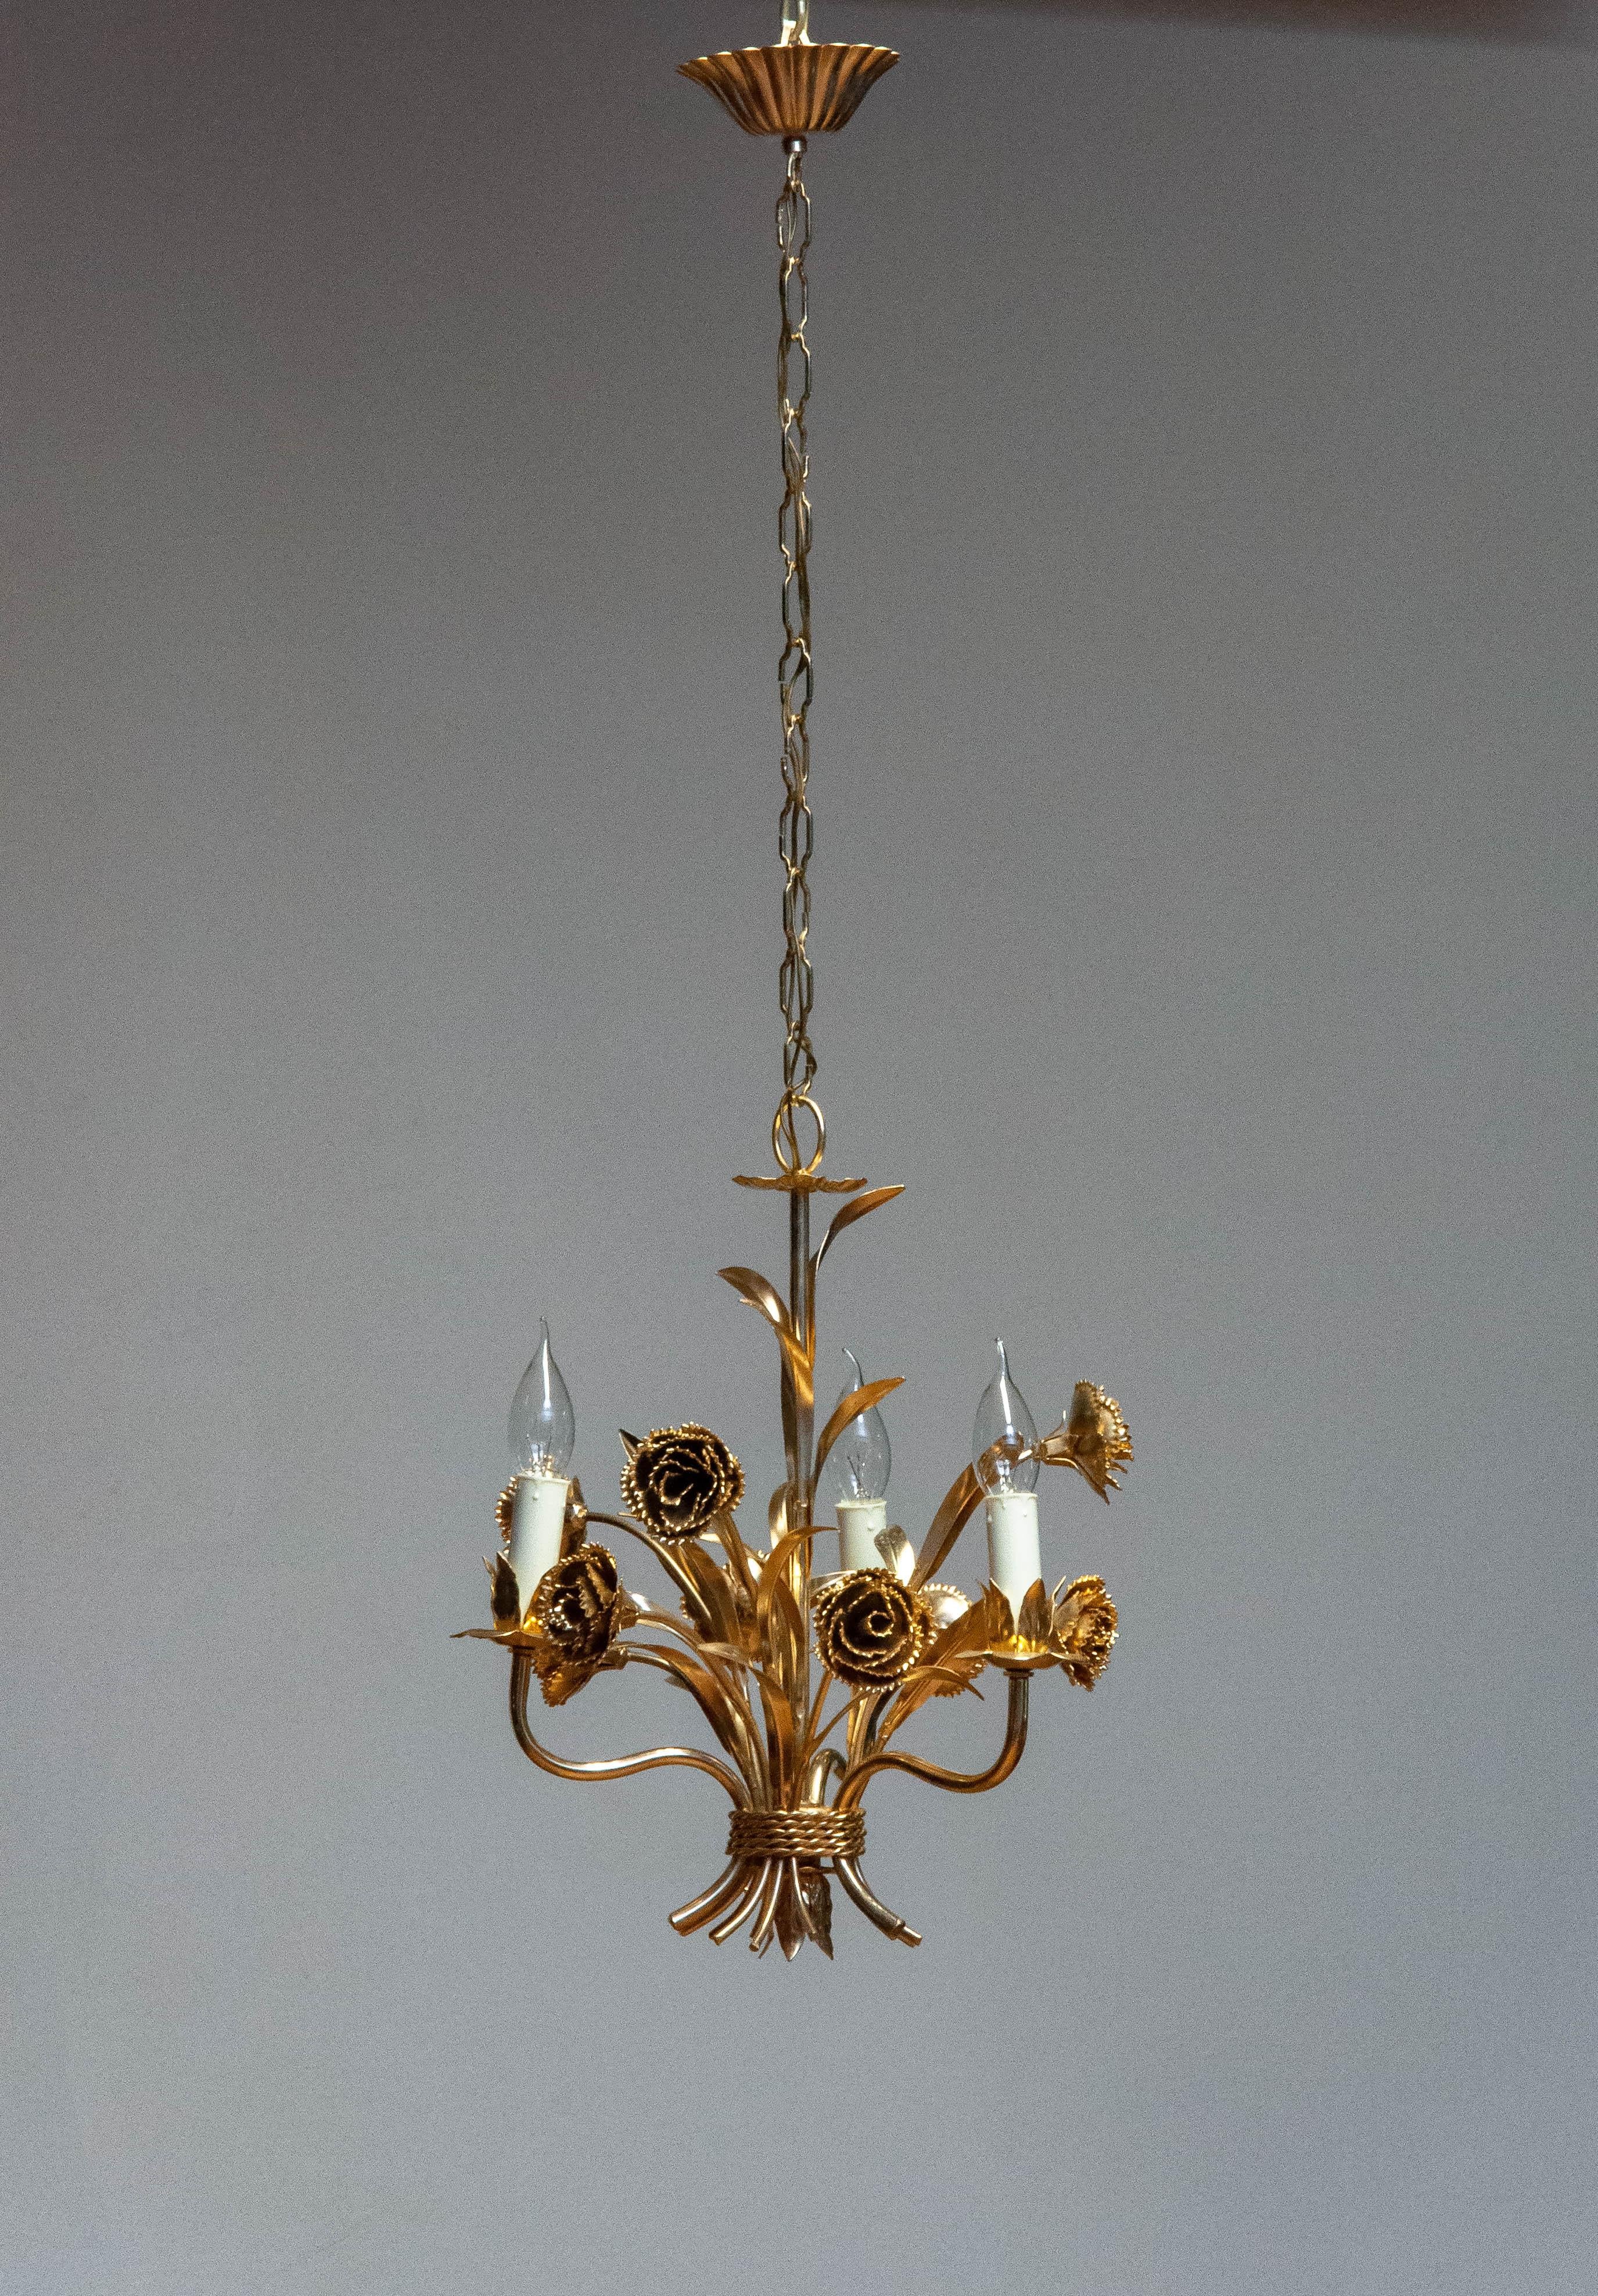 1960s Gilded German Chandelier With Floral Decor By Hans Kogl For Sale 2